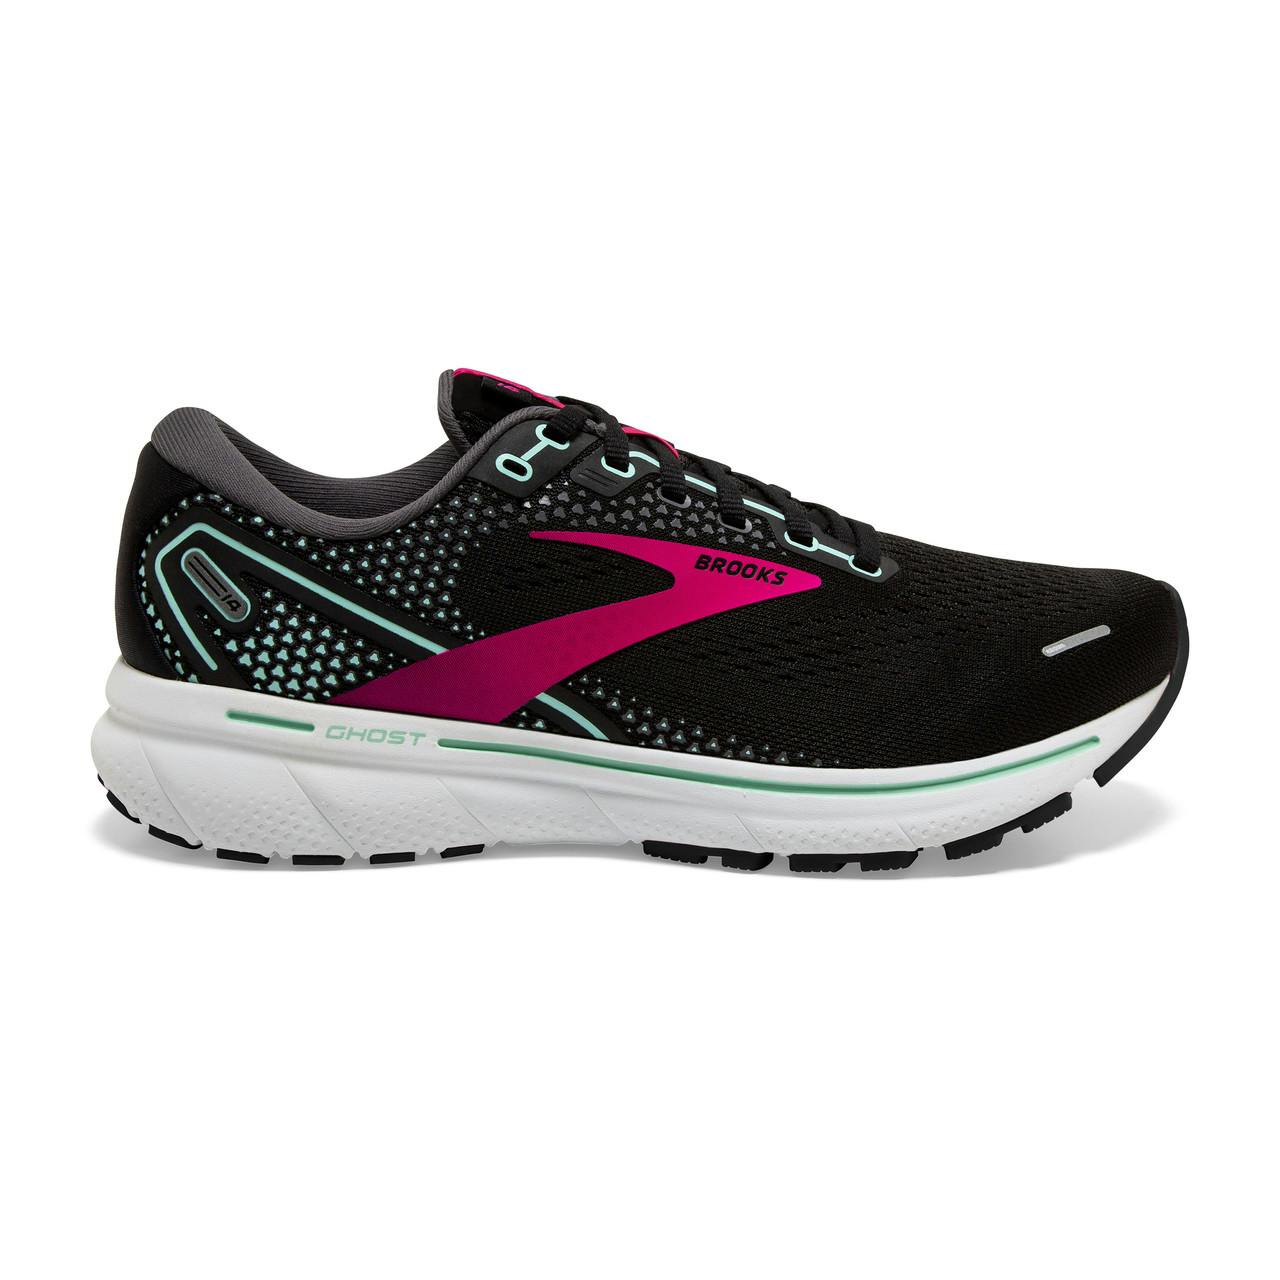 Ghost 14 Road Running Shoes Black/Pink/Yucca